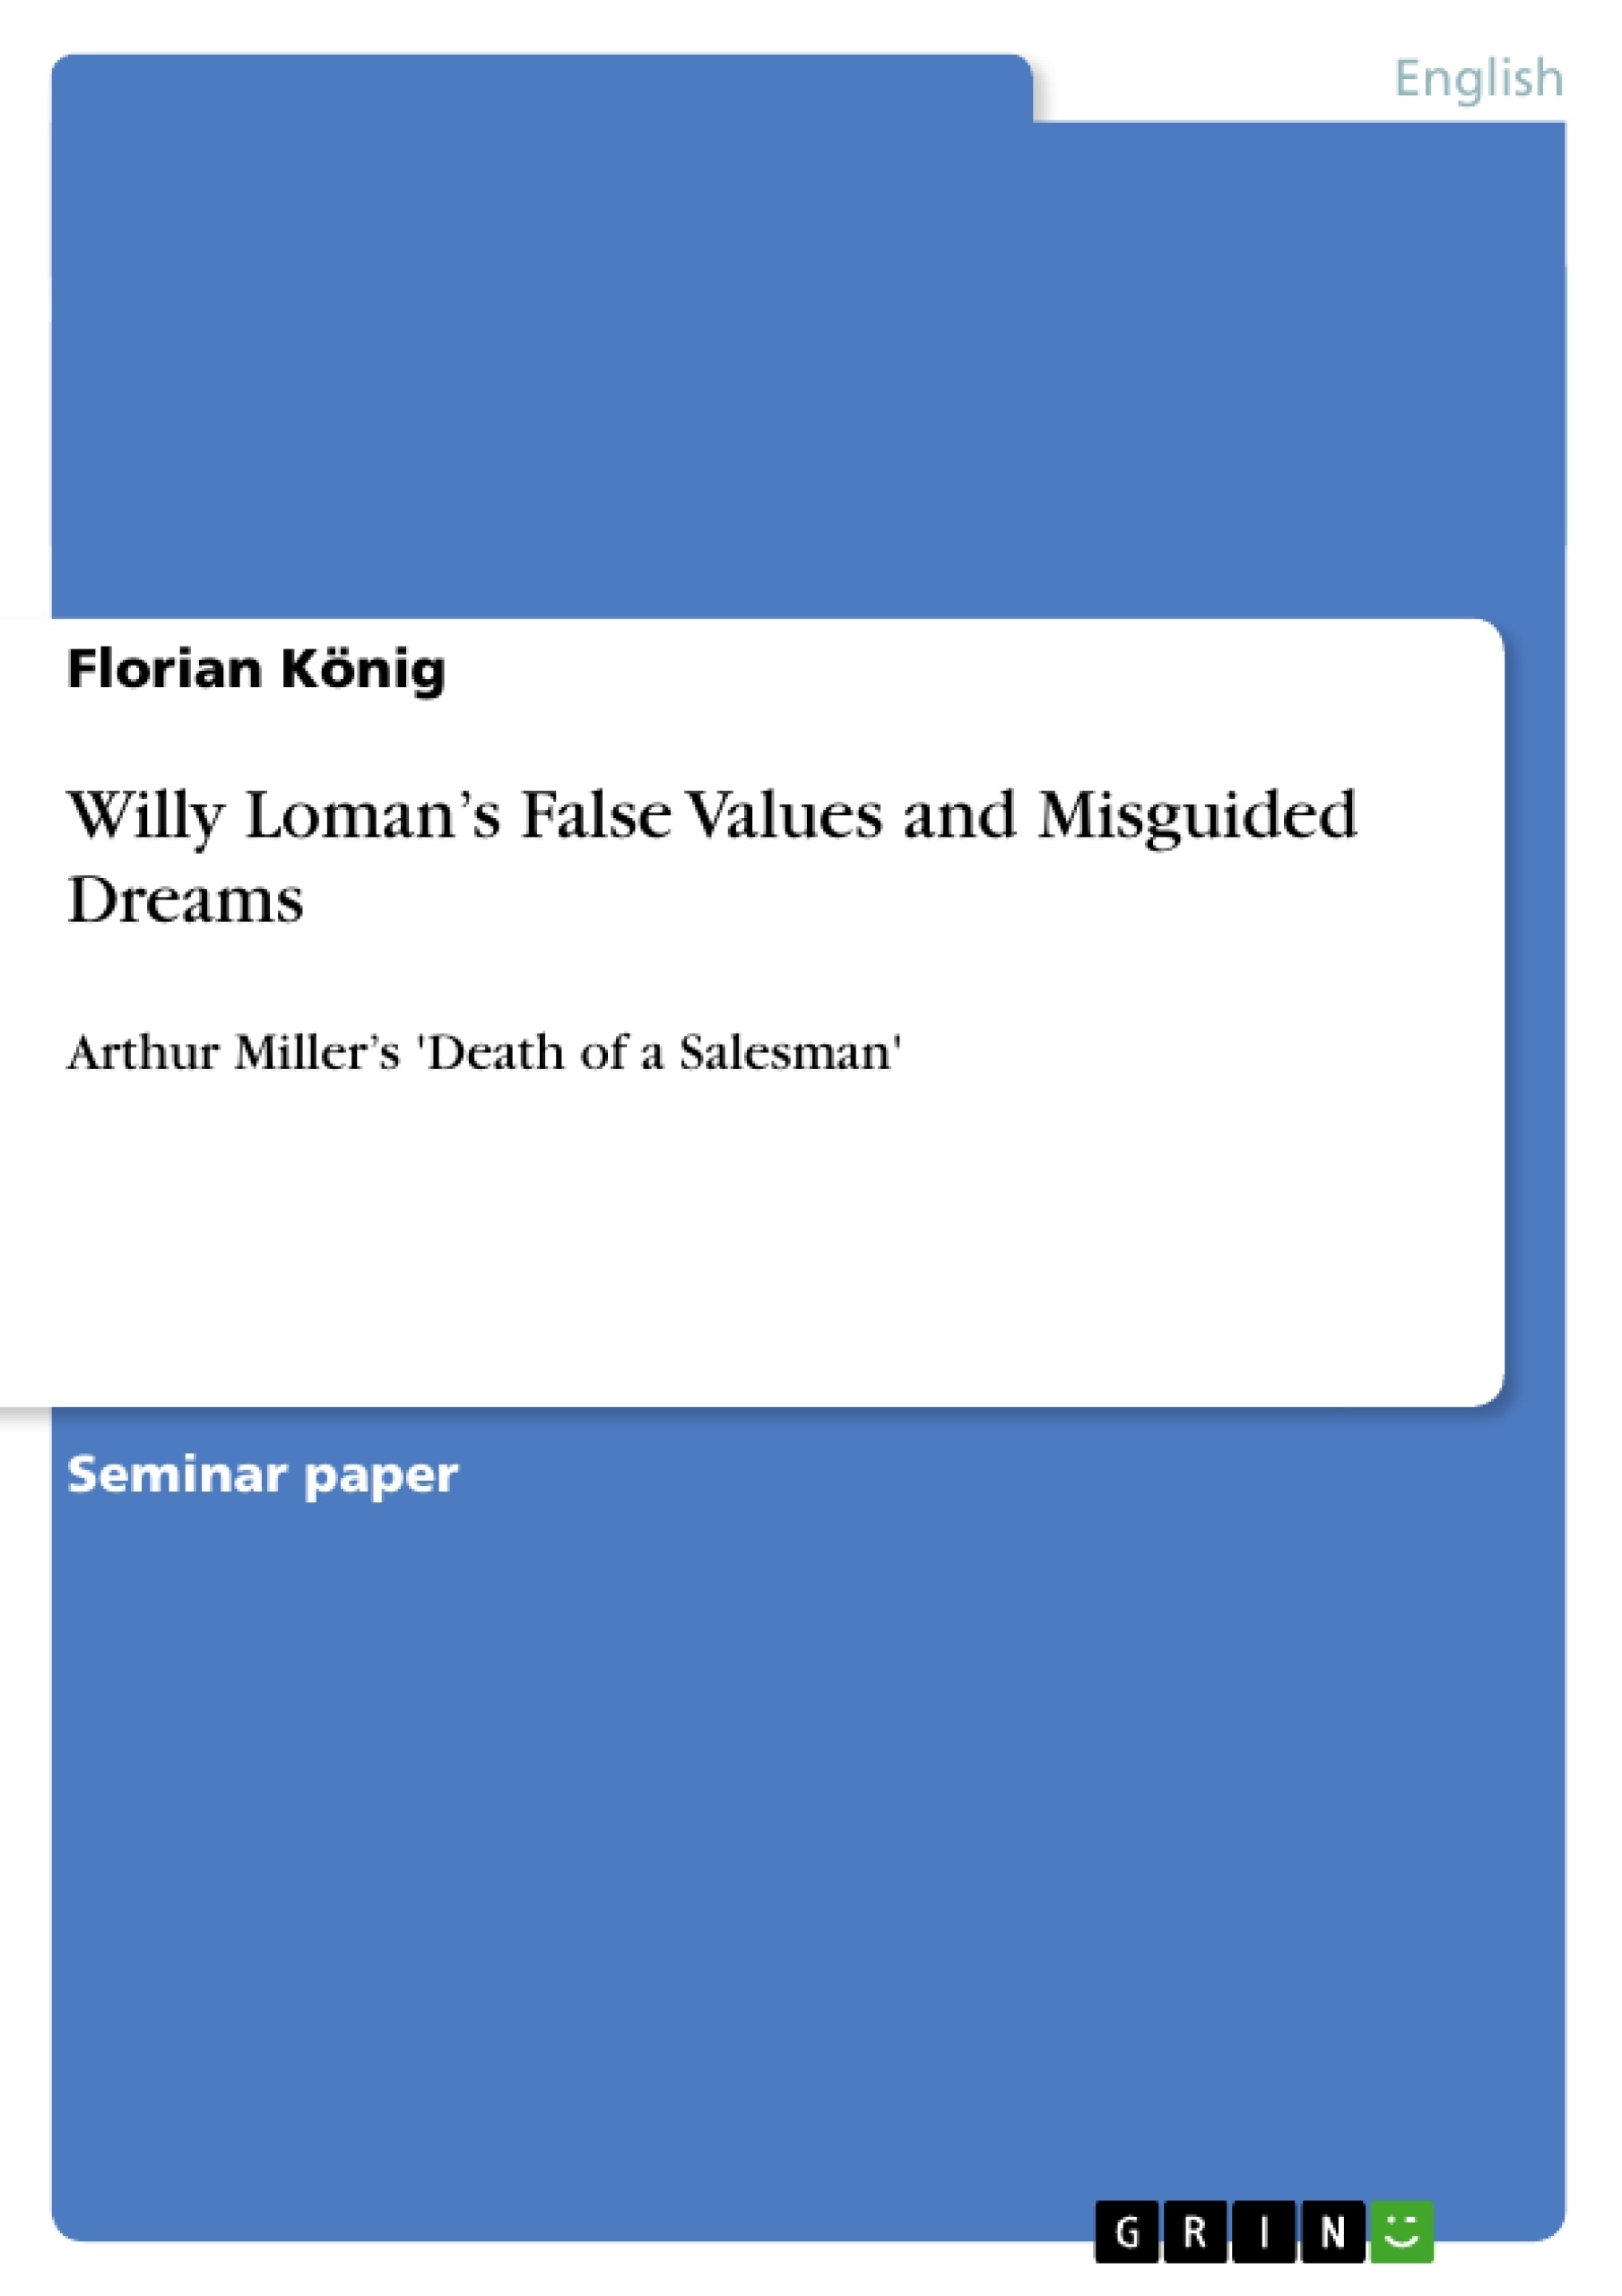 Titre: Willy Loman’s False Values and Misguided Dreams